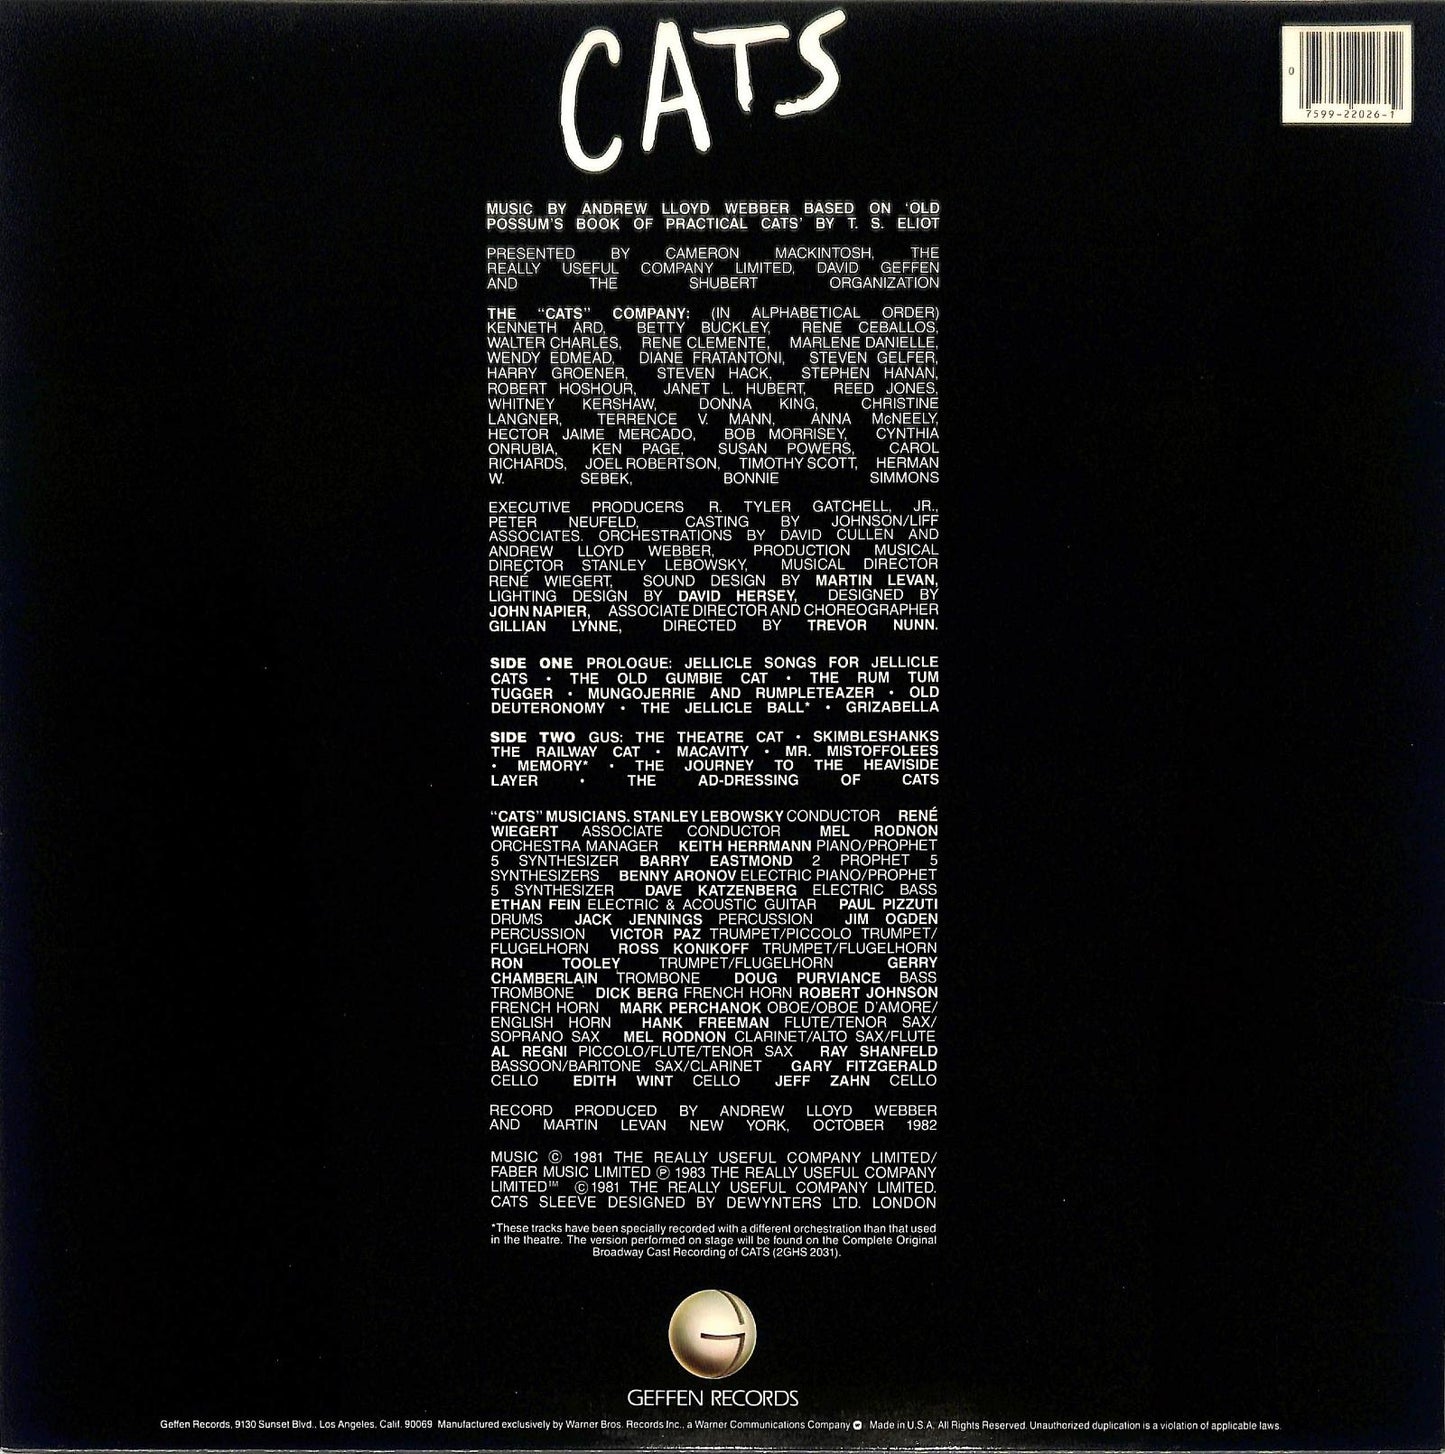 ANDREW LLOYD WEBBER - Cats (Selections From The Original Broadway Cast Recording)